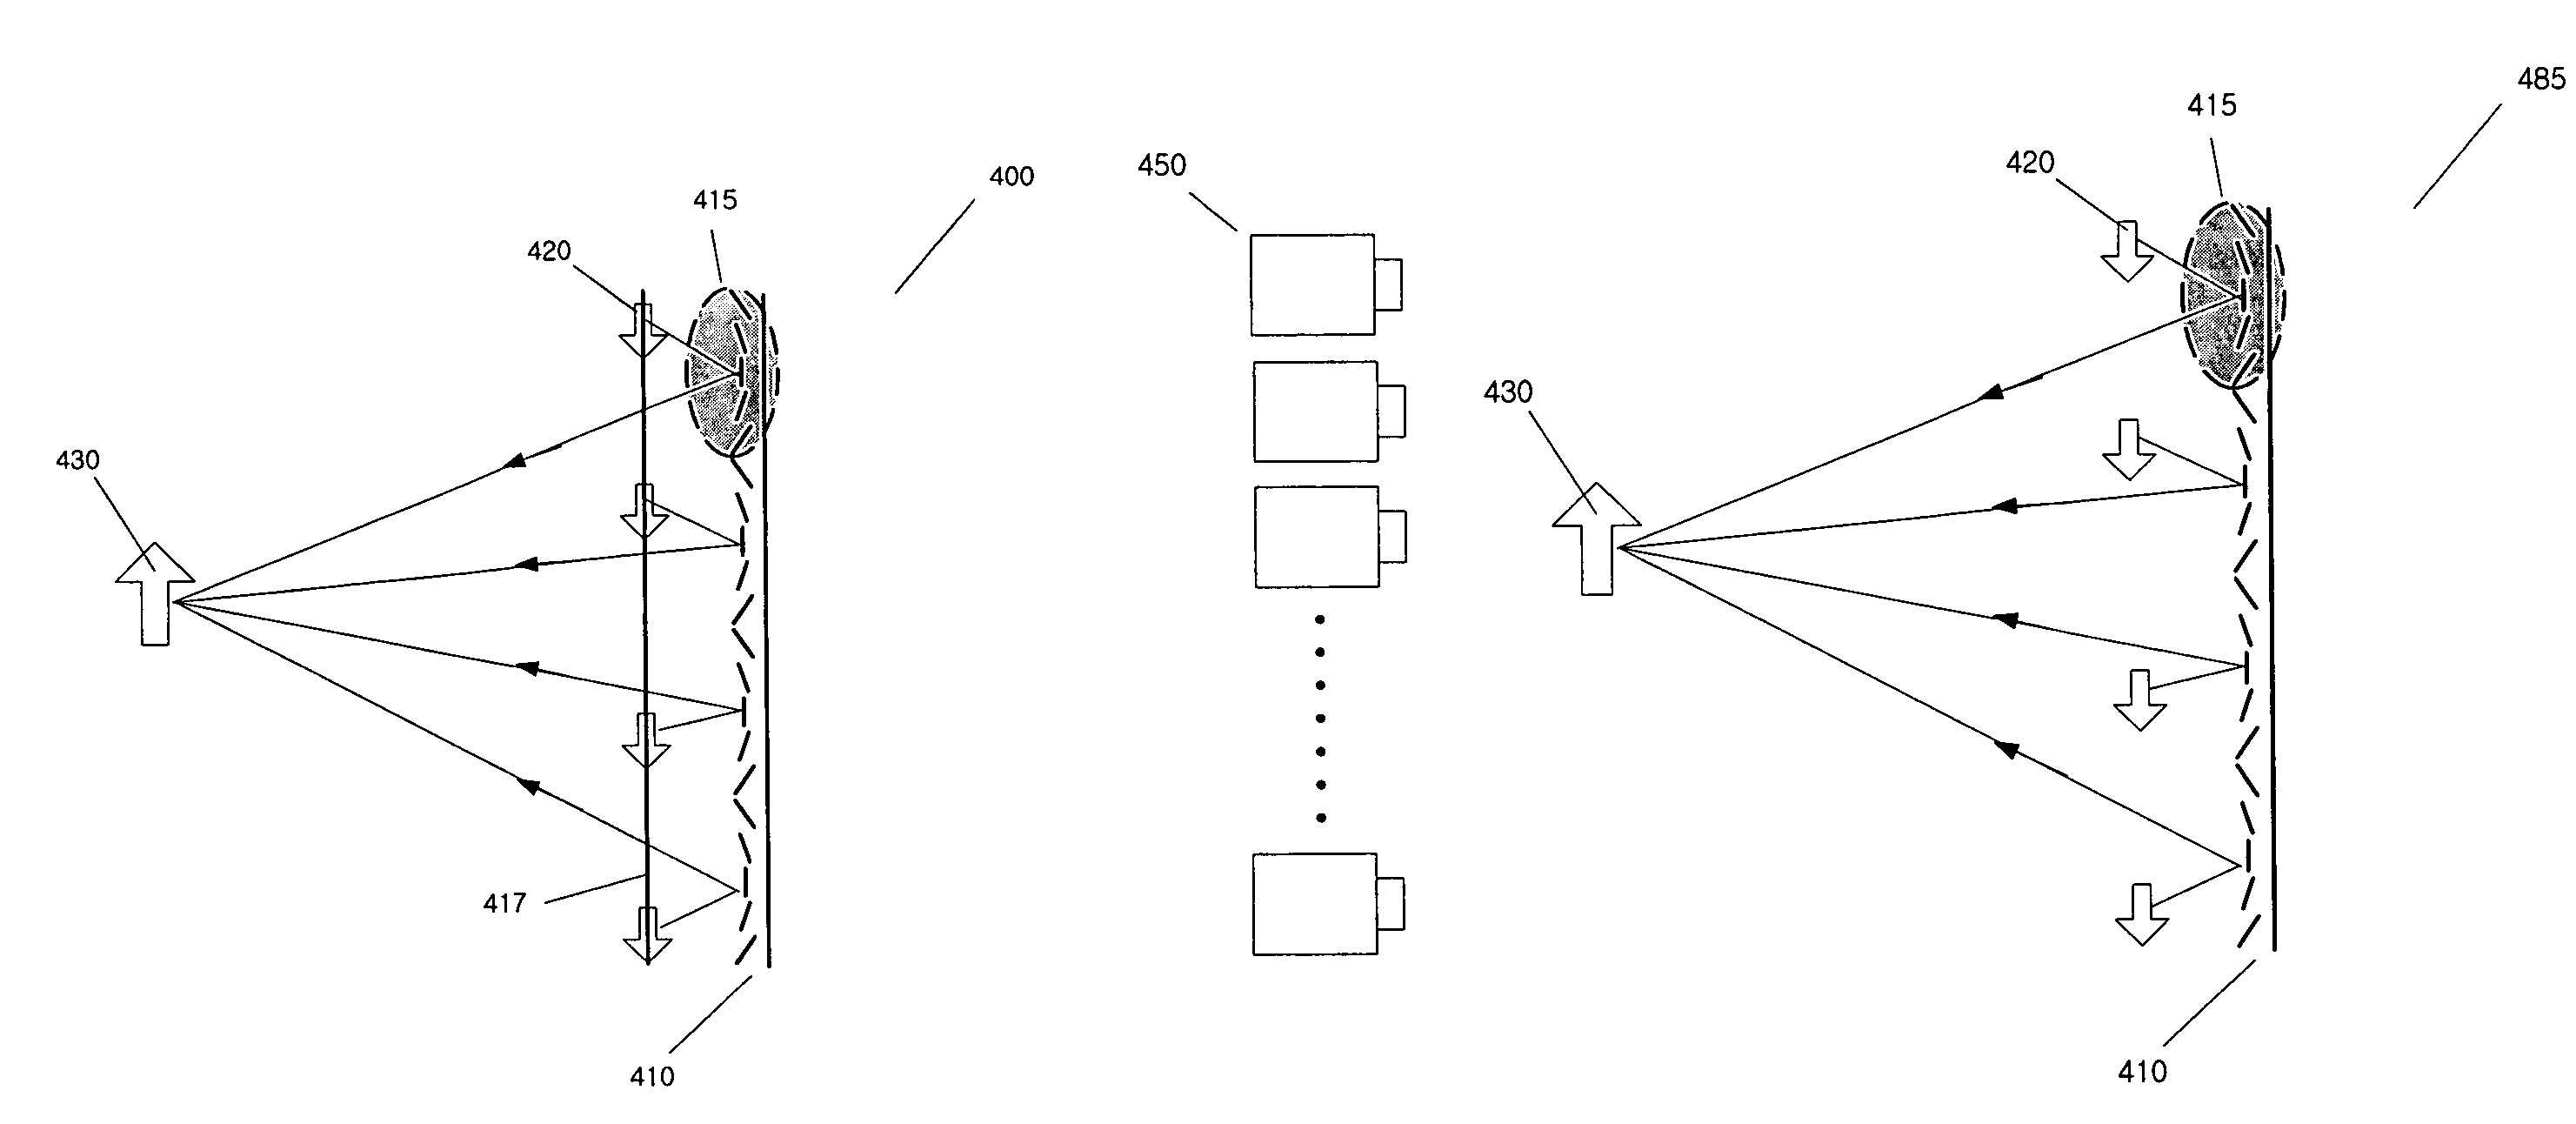 Three-dimensional integral imaging and display system using variable focal length lens